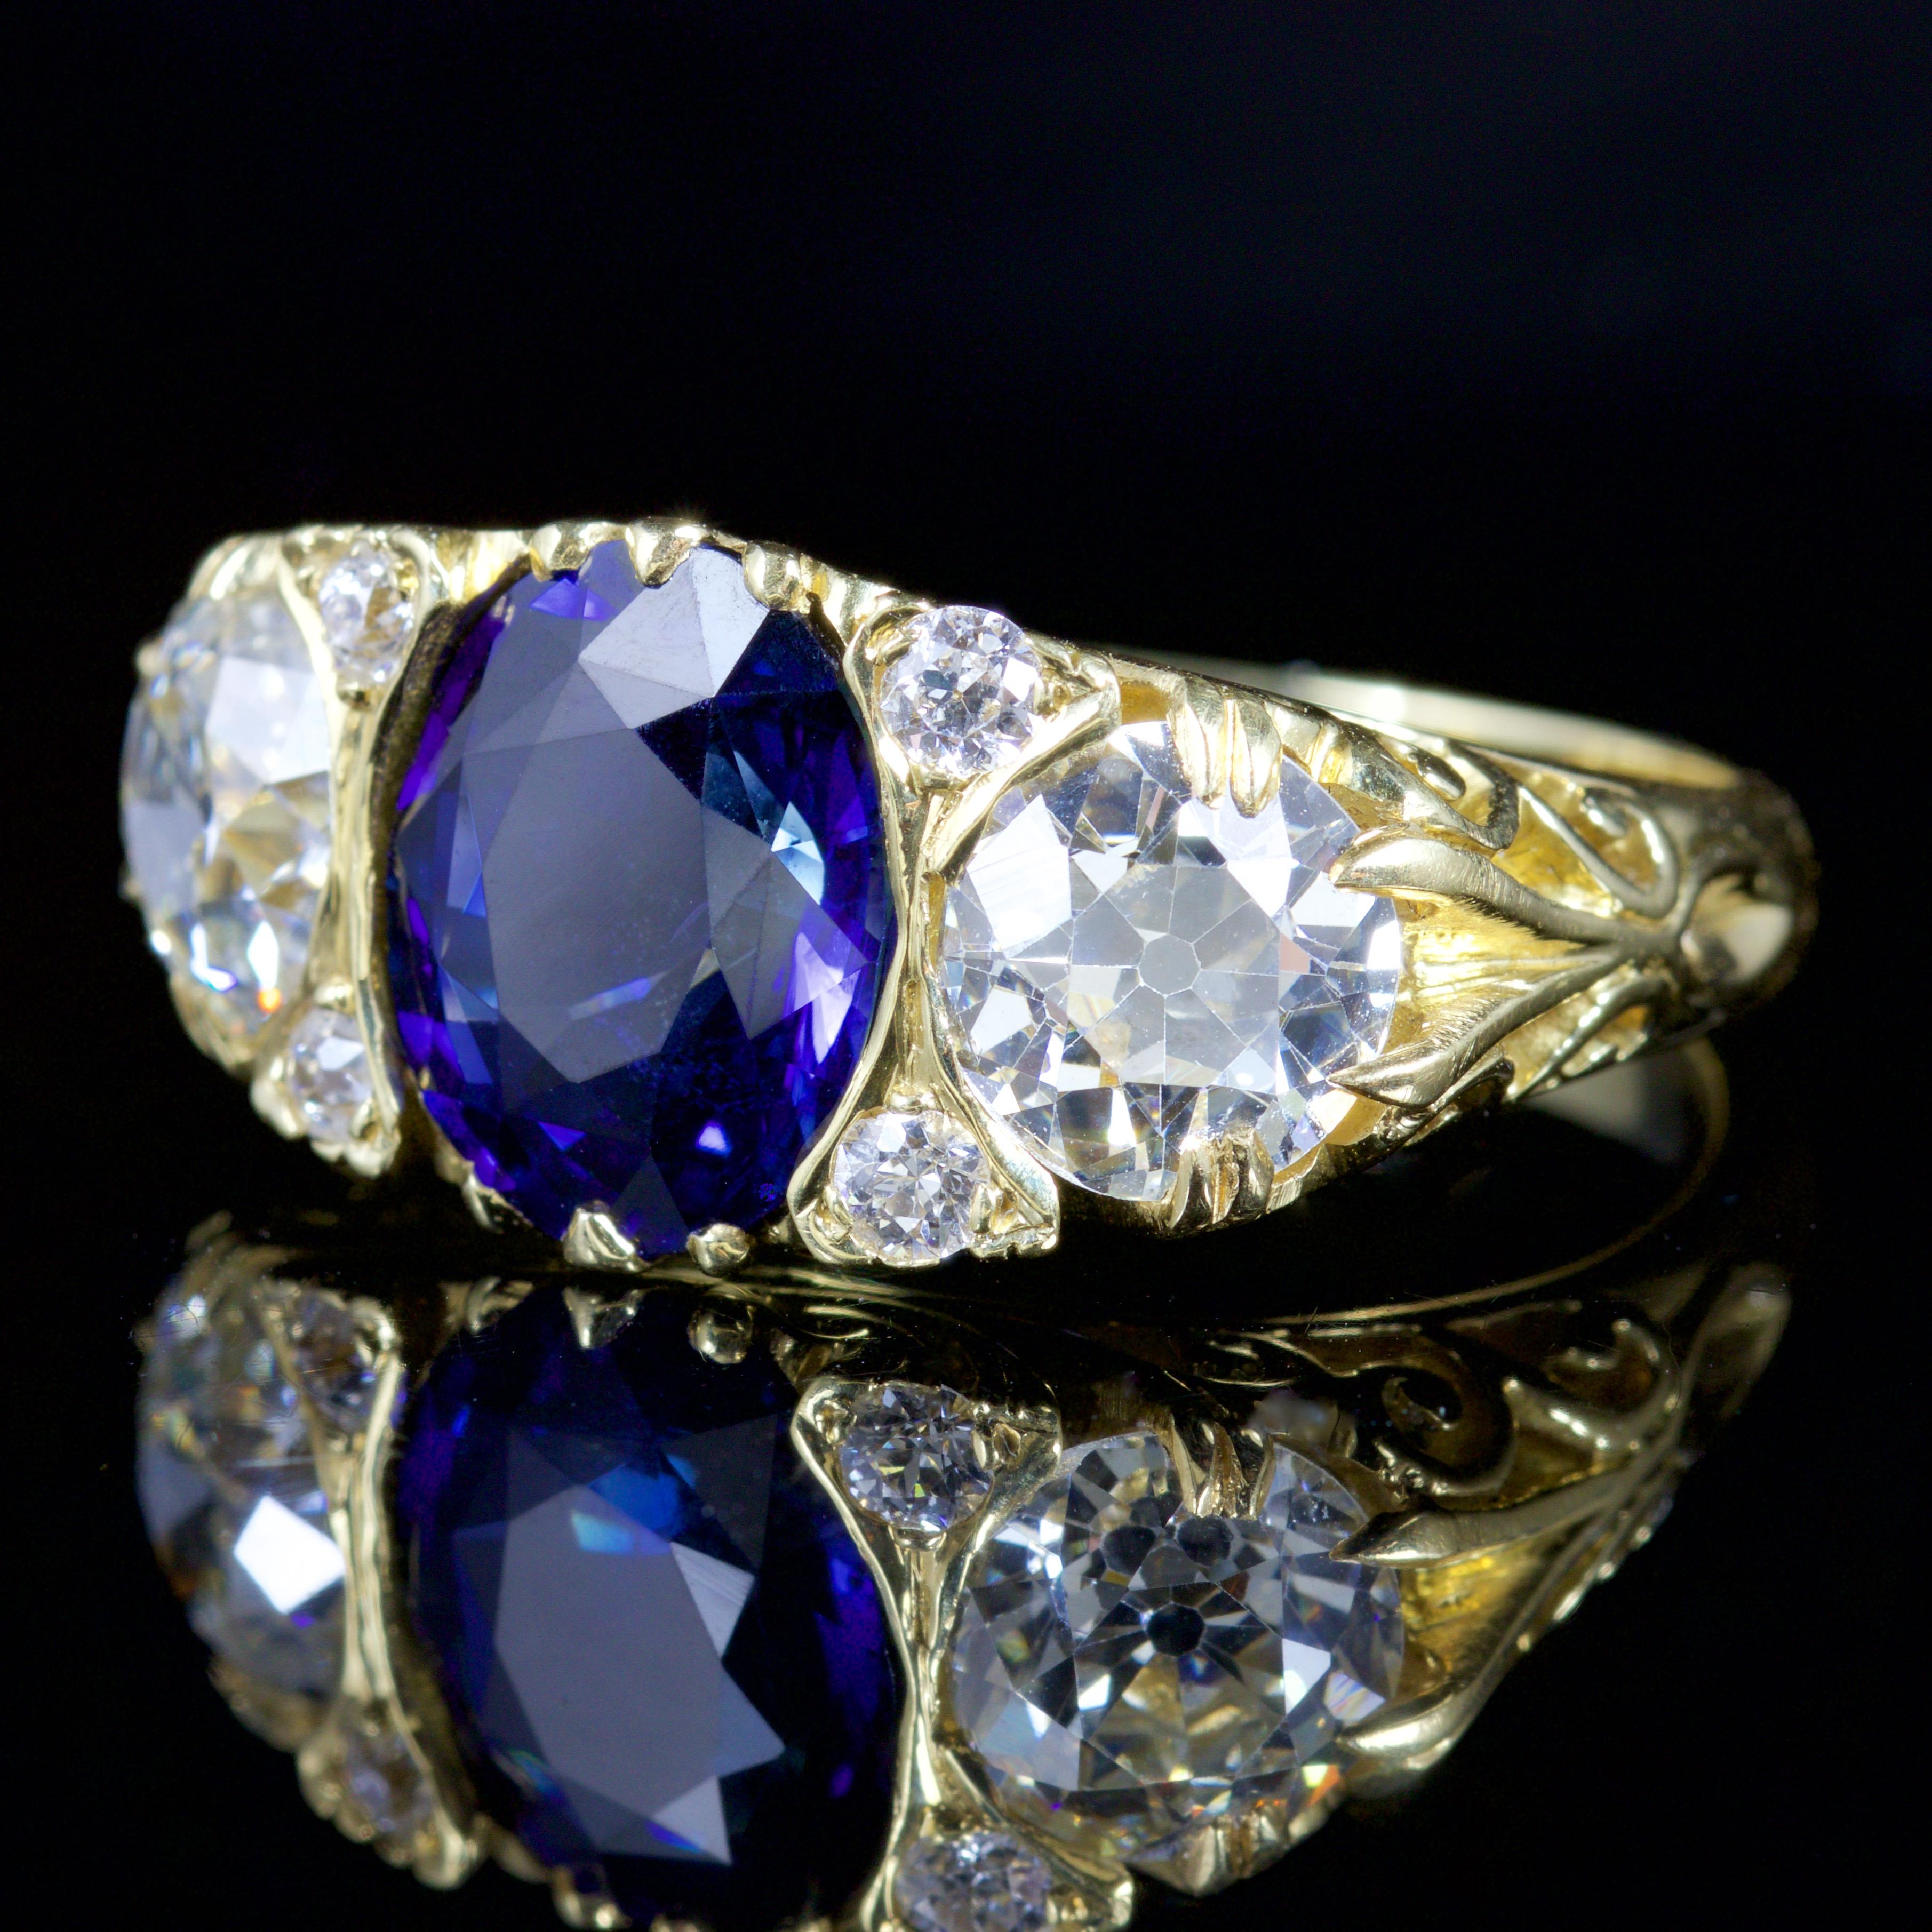 This grand and beautiful 18ct Gold Victorian ring is Circa 1880.

This spectacular ring boasts a central Sapphire which is weighted at 3.92ct, and spreads to 4ct.

Sapphire and known to bring peace and harmony to the wearer and also financial